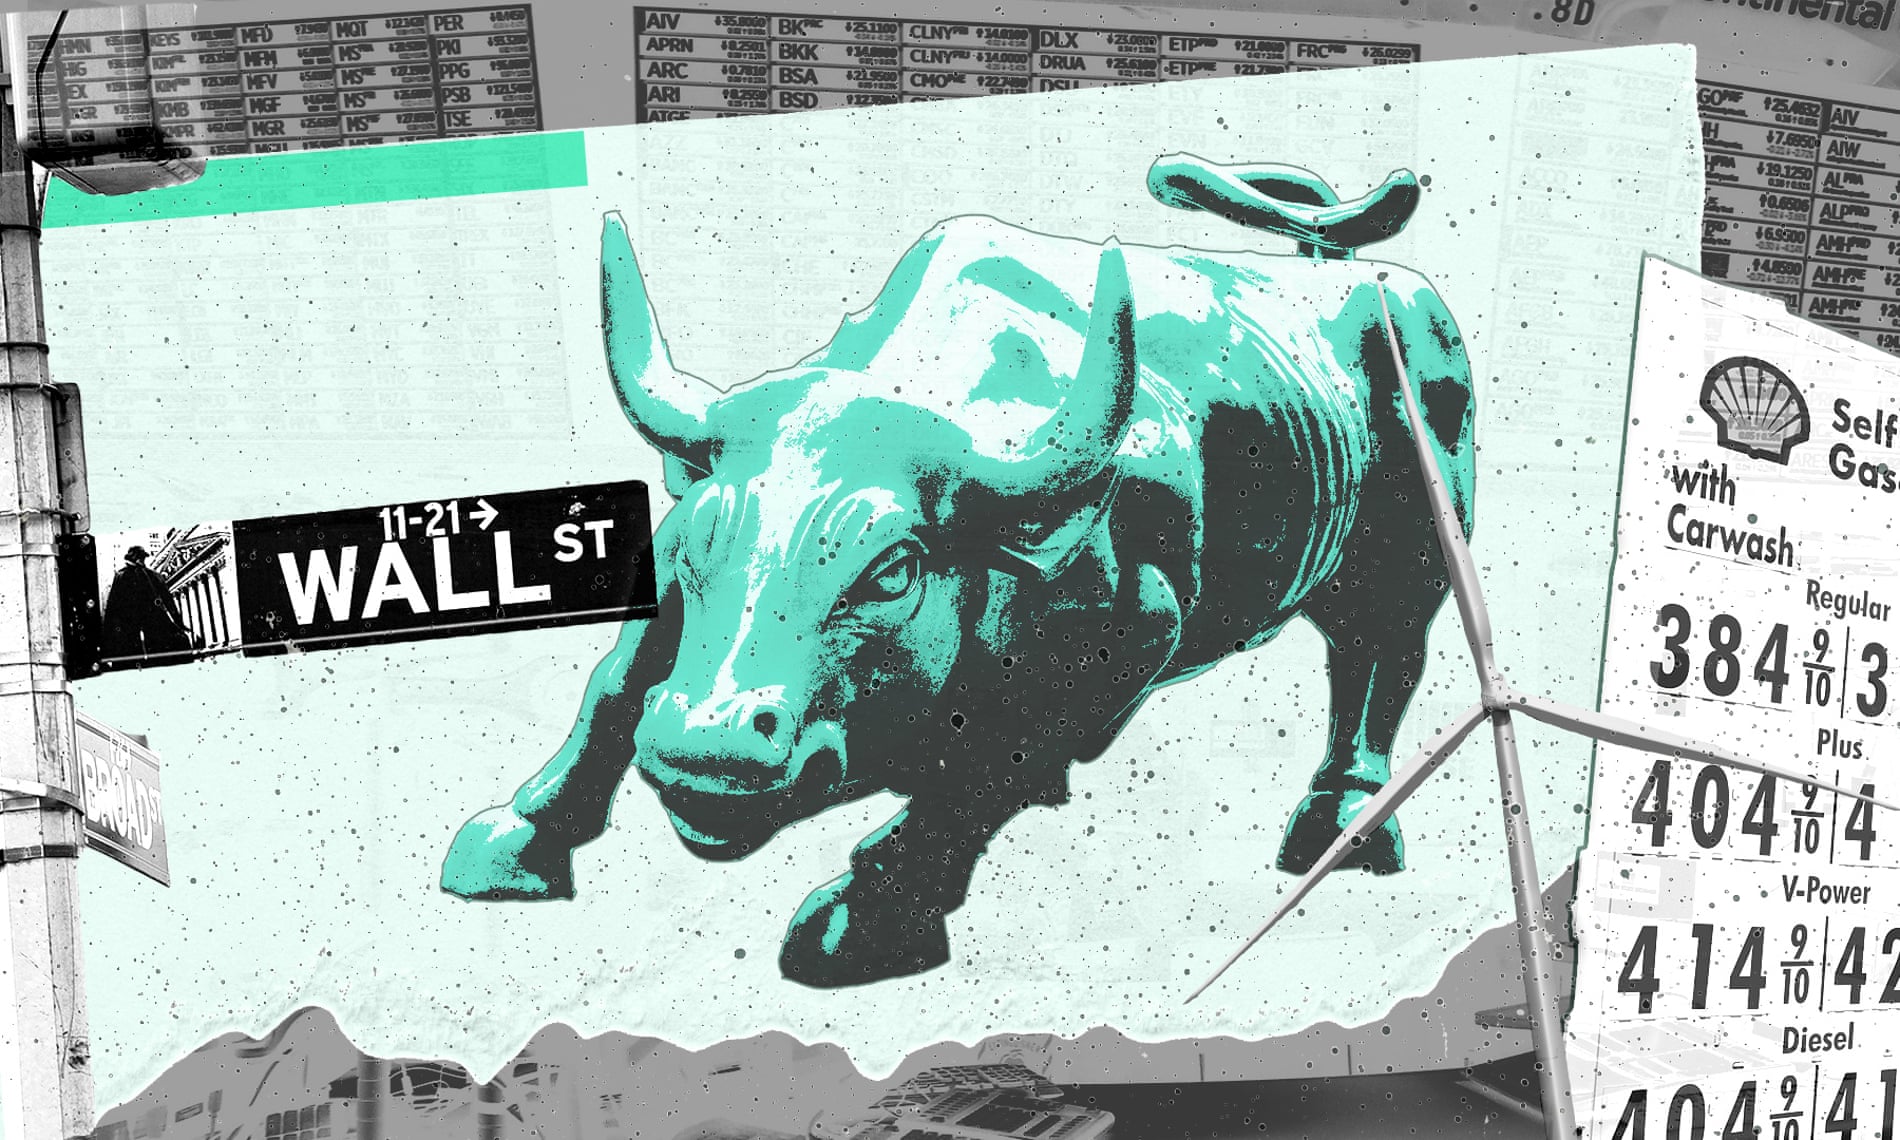 Composite of Wall Street bull and Wall Street sign.